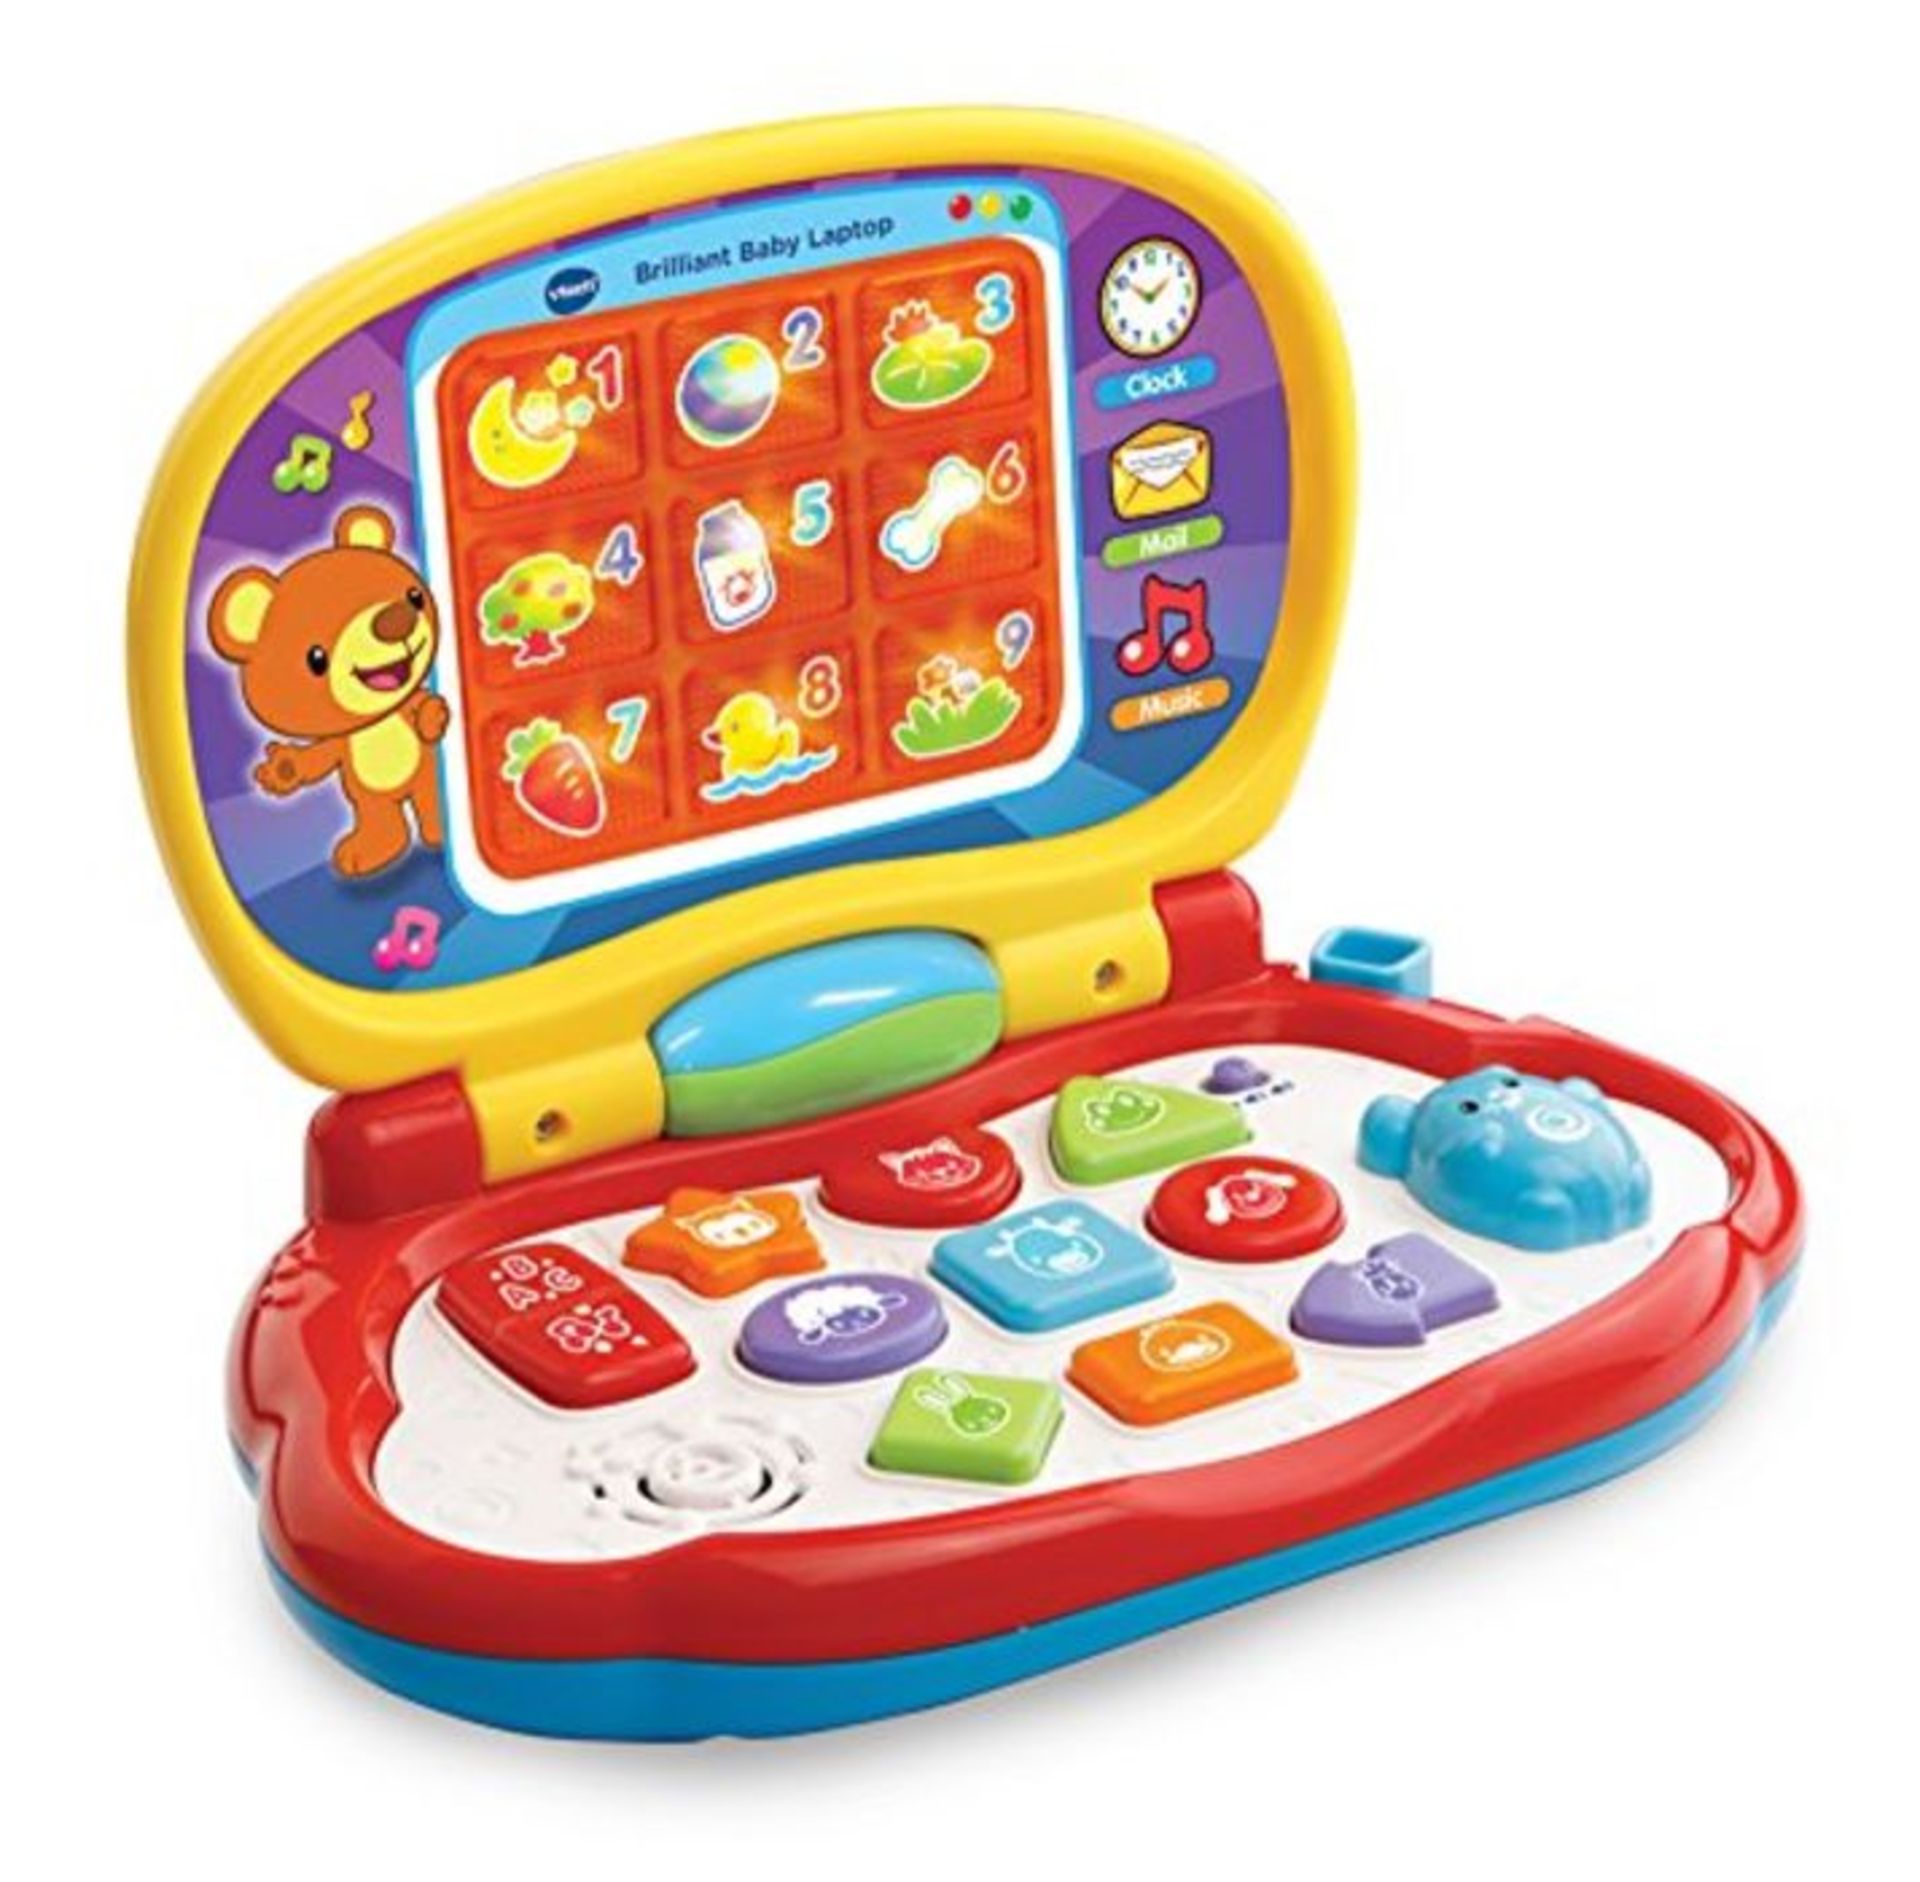 VTech Baby Laptop, Colourful Kids Laptop with LCD Screen, Sound Effects, Phrases and S